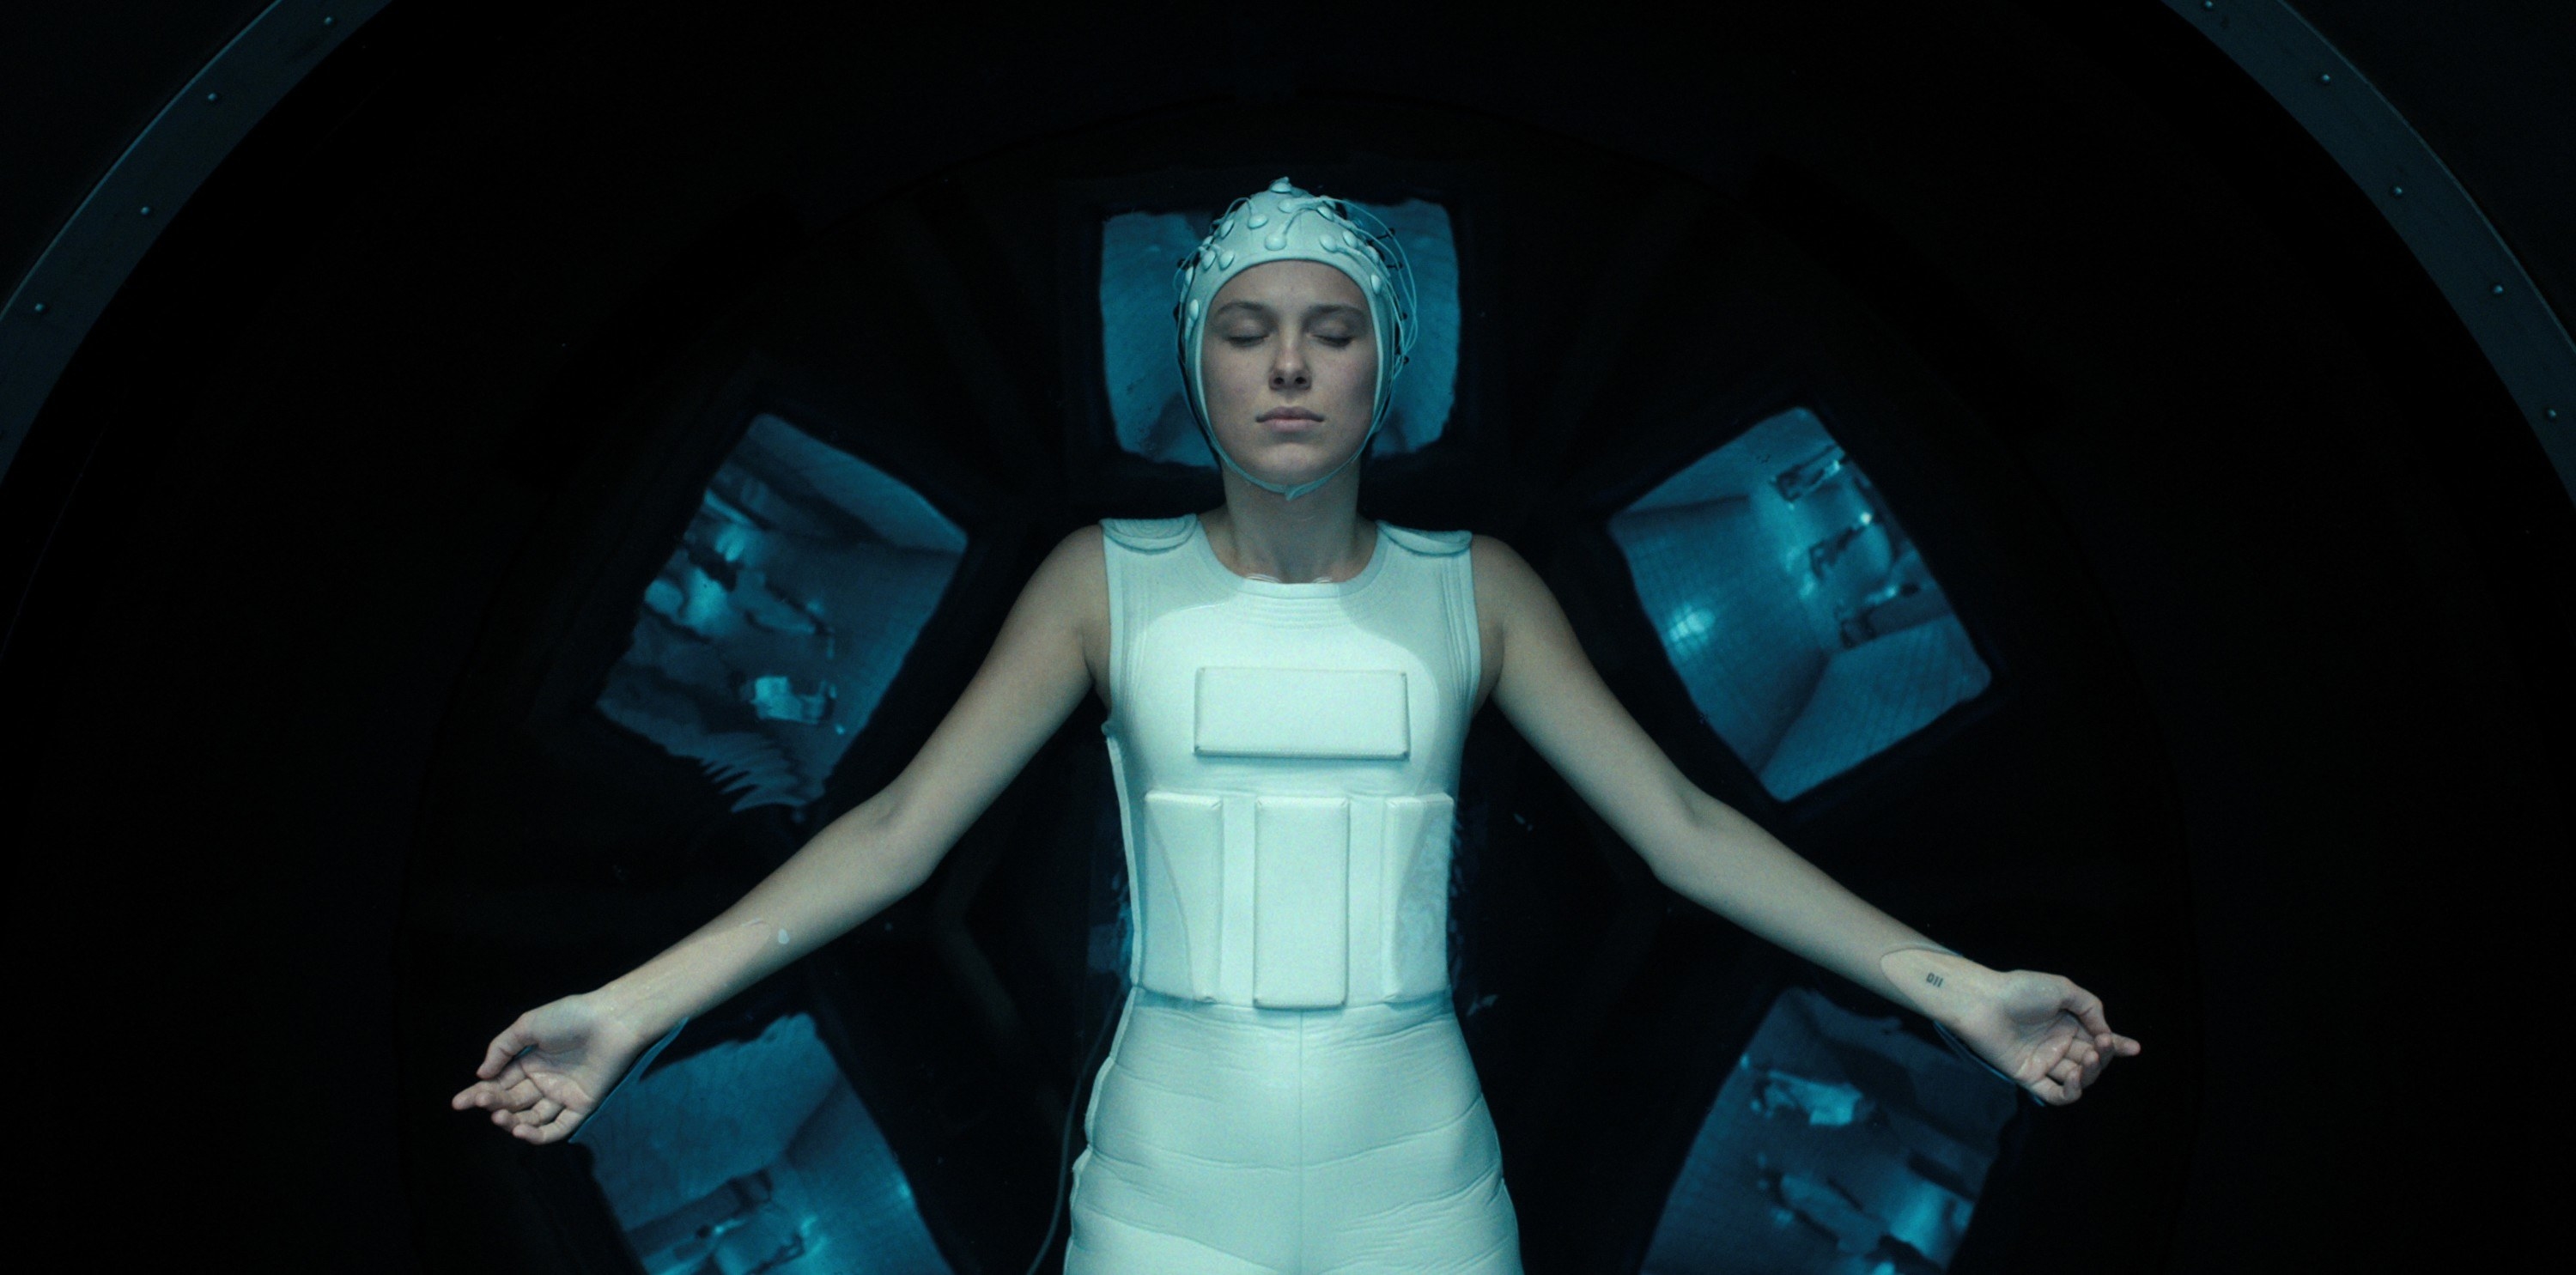 Eleven lies in a water tank in a weighted body suit and matching helmet